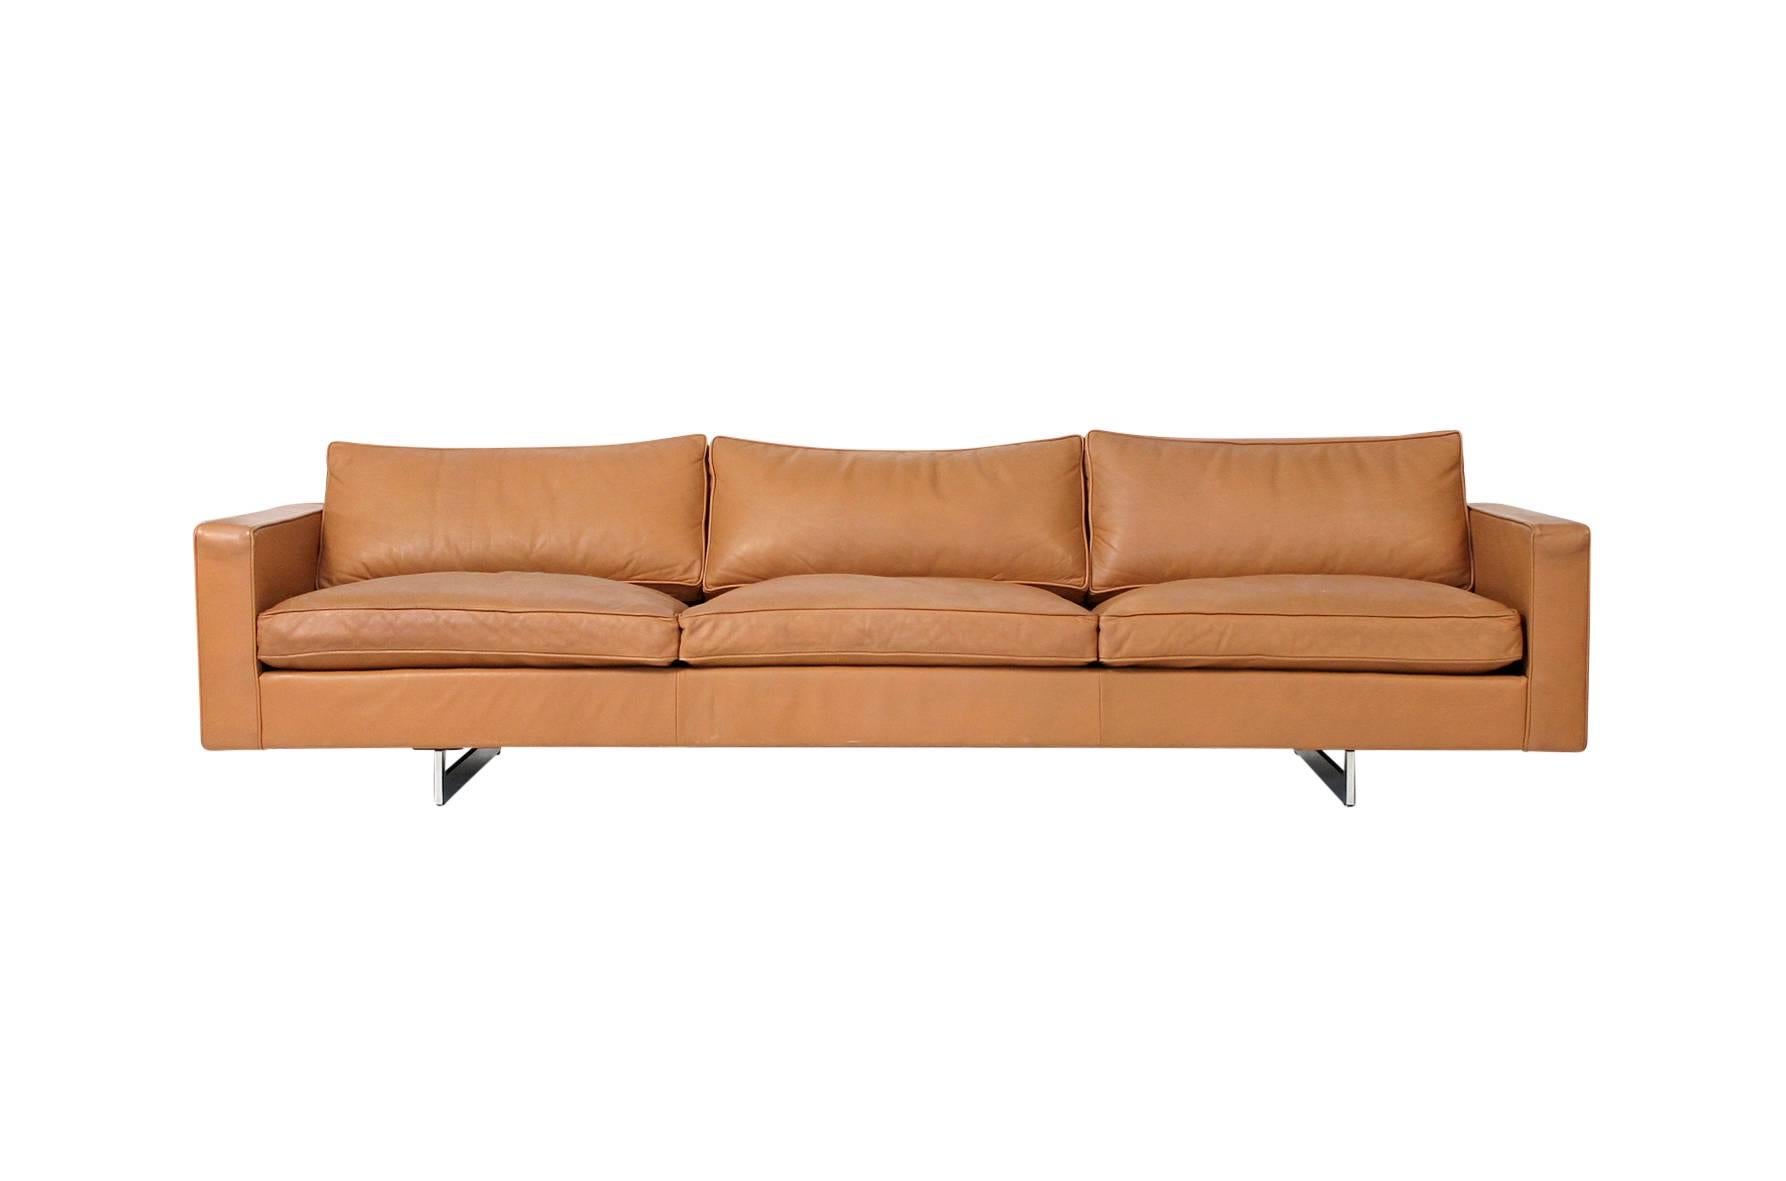 Rare sofa and chair set by noted American designer Jens Risom. Large-scale and comfortable seating in original tan leather with down filled cushions over chrome steel sled bases. Priced as a set please inquire for individual pricing. Chair